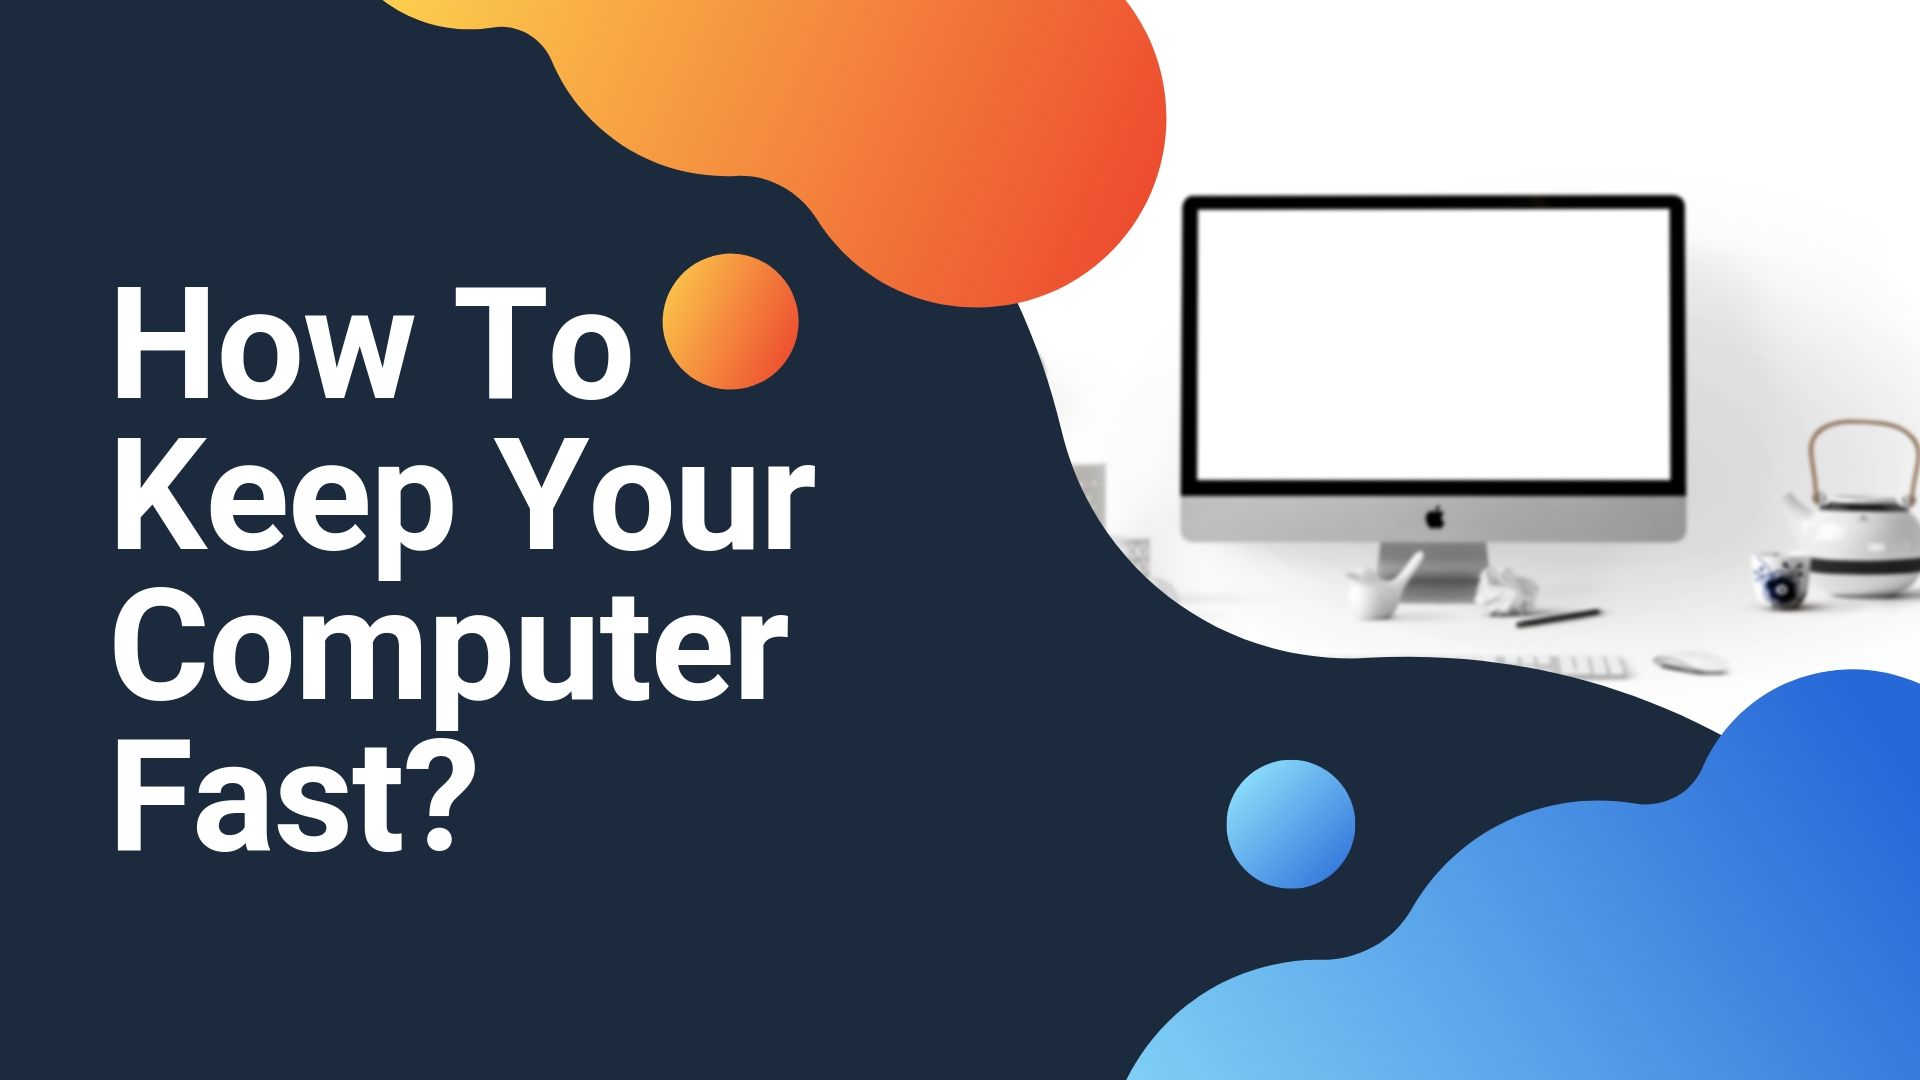 How to keep your Computer fast?